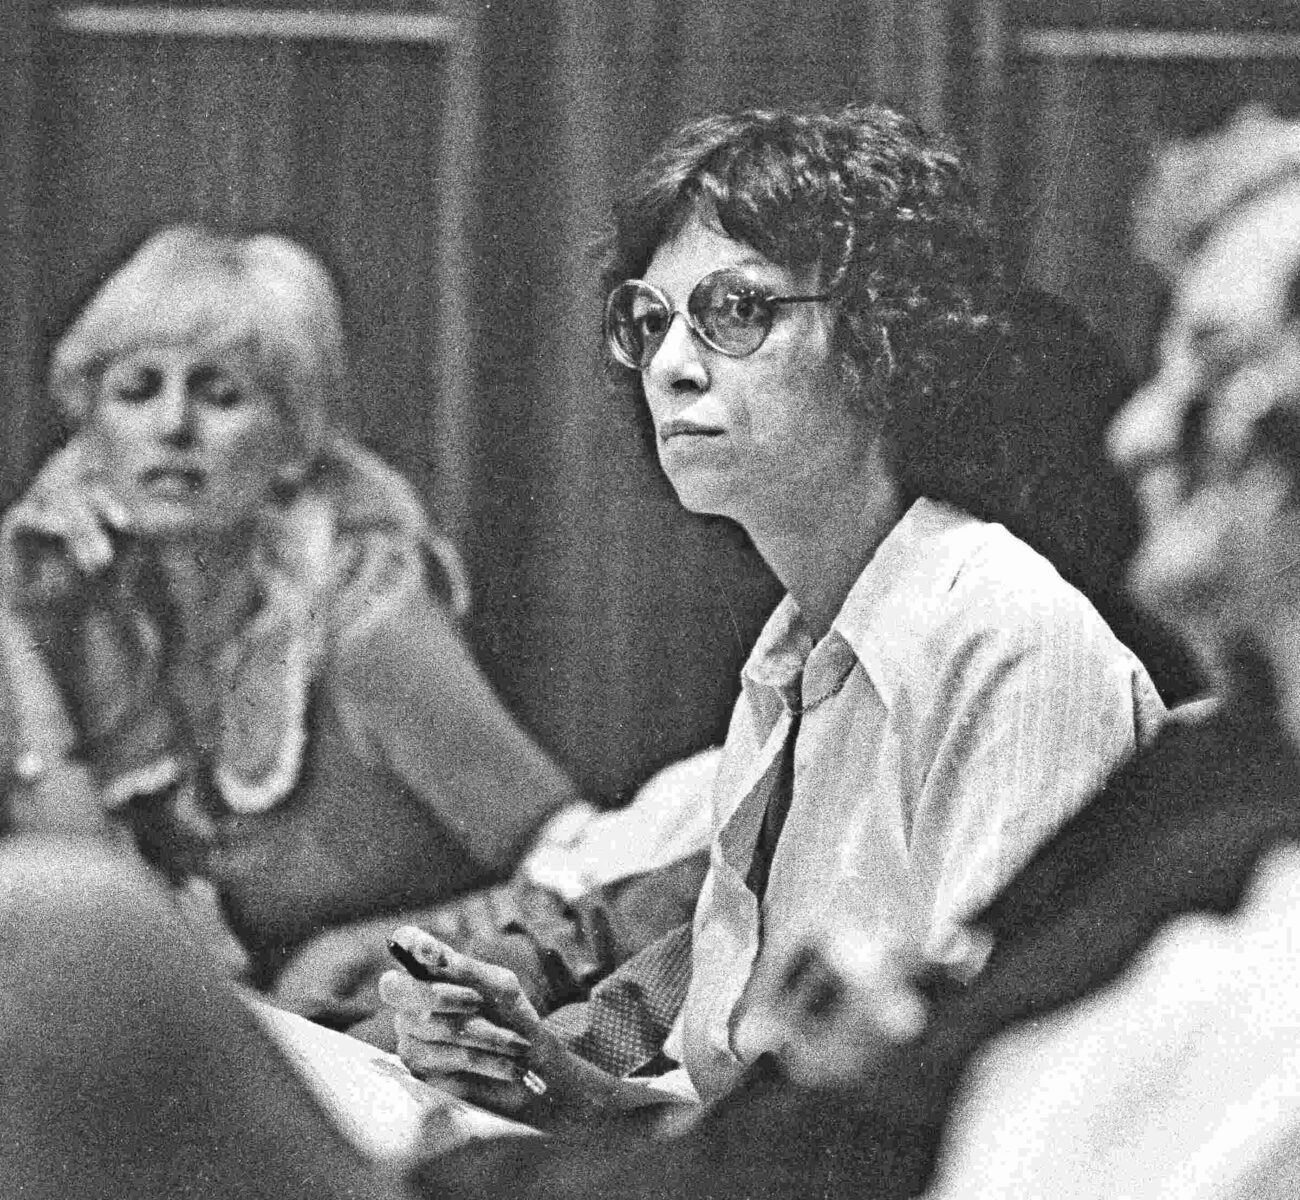 There's an entire library of Ted Bundy films at our disposal, but what about his wife, Carole Ann Boone? Should she get her own movie? Dive into the deets.